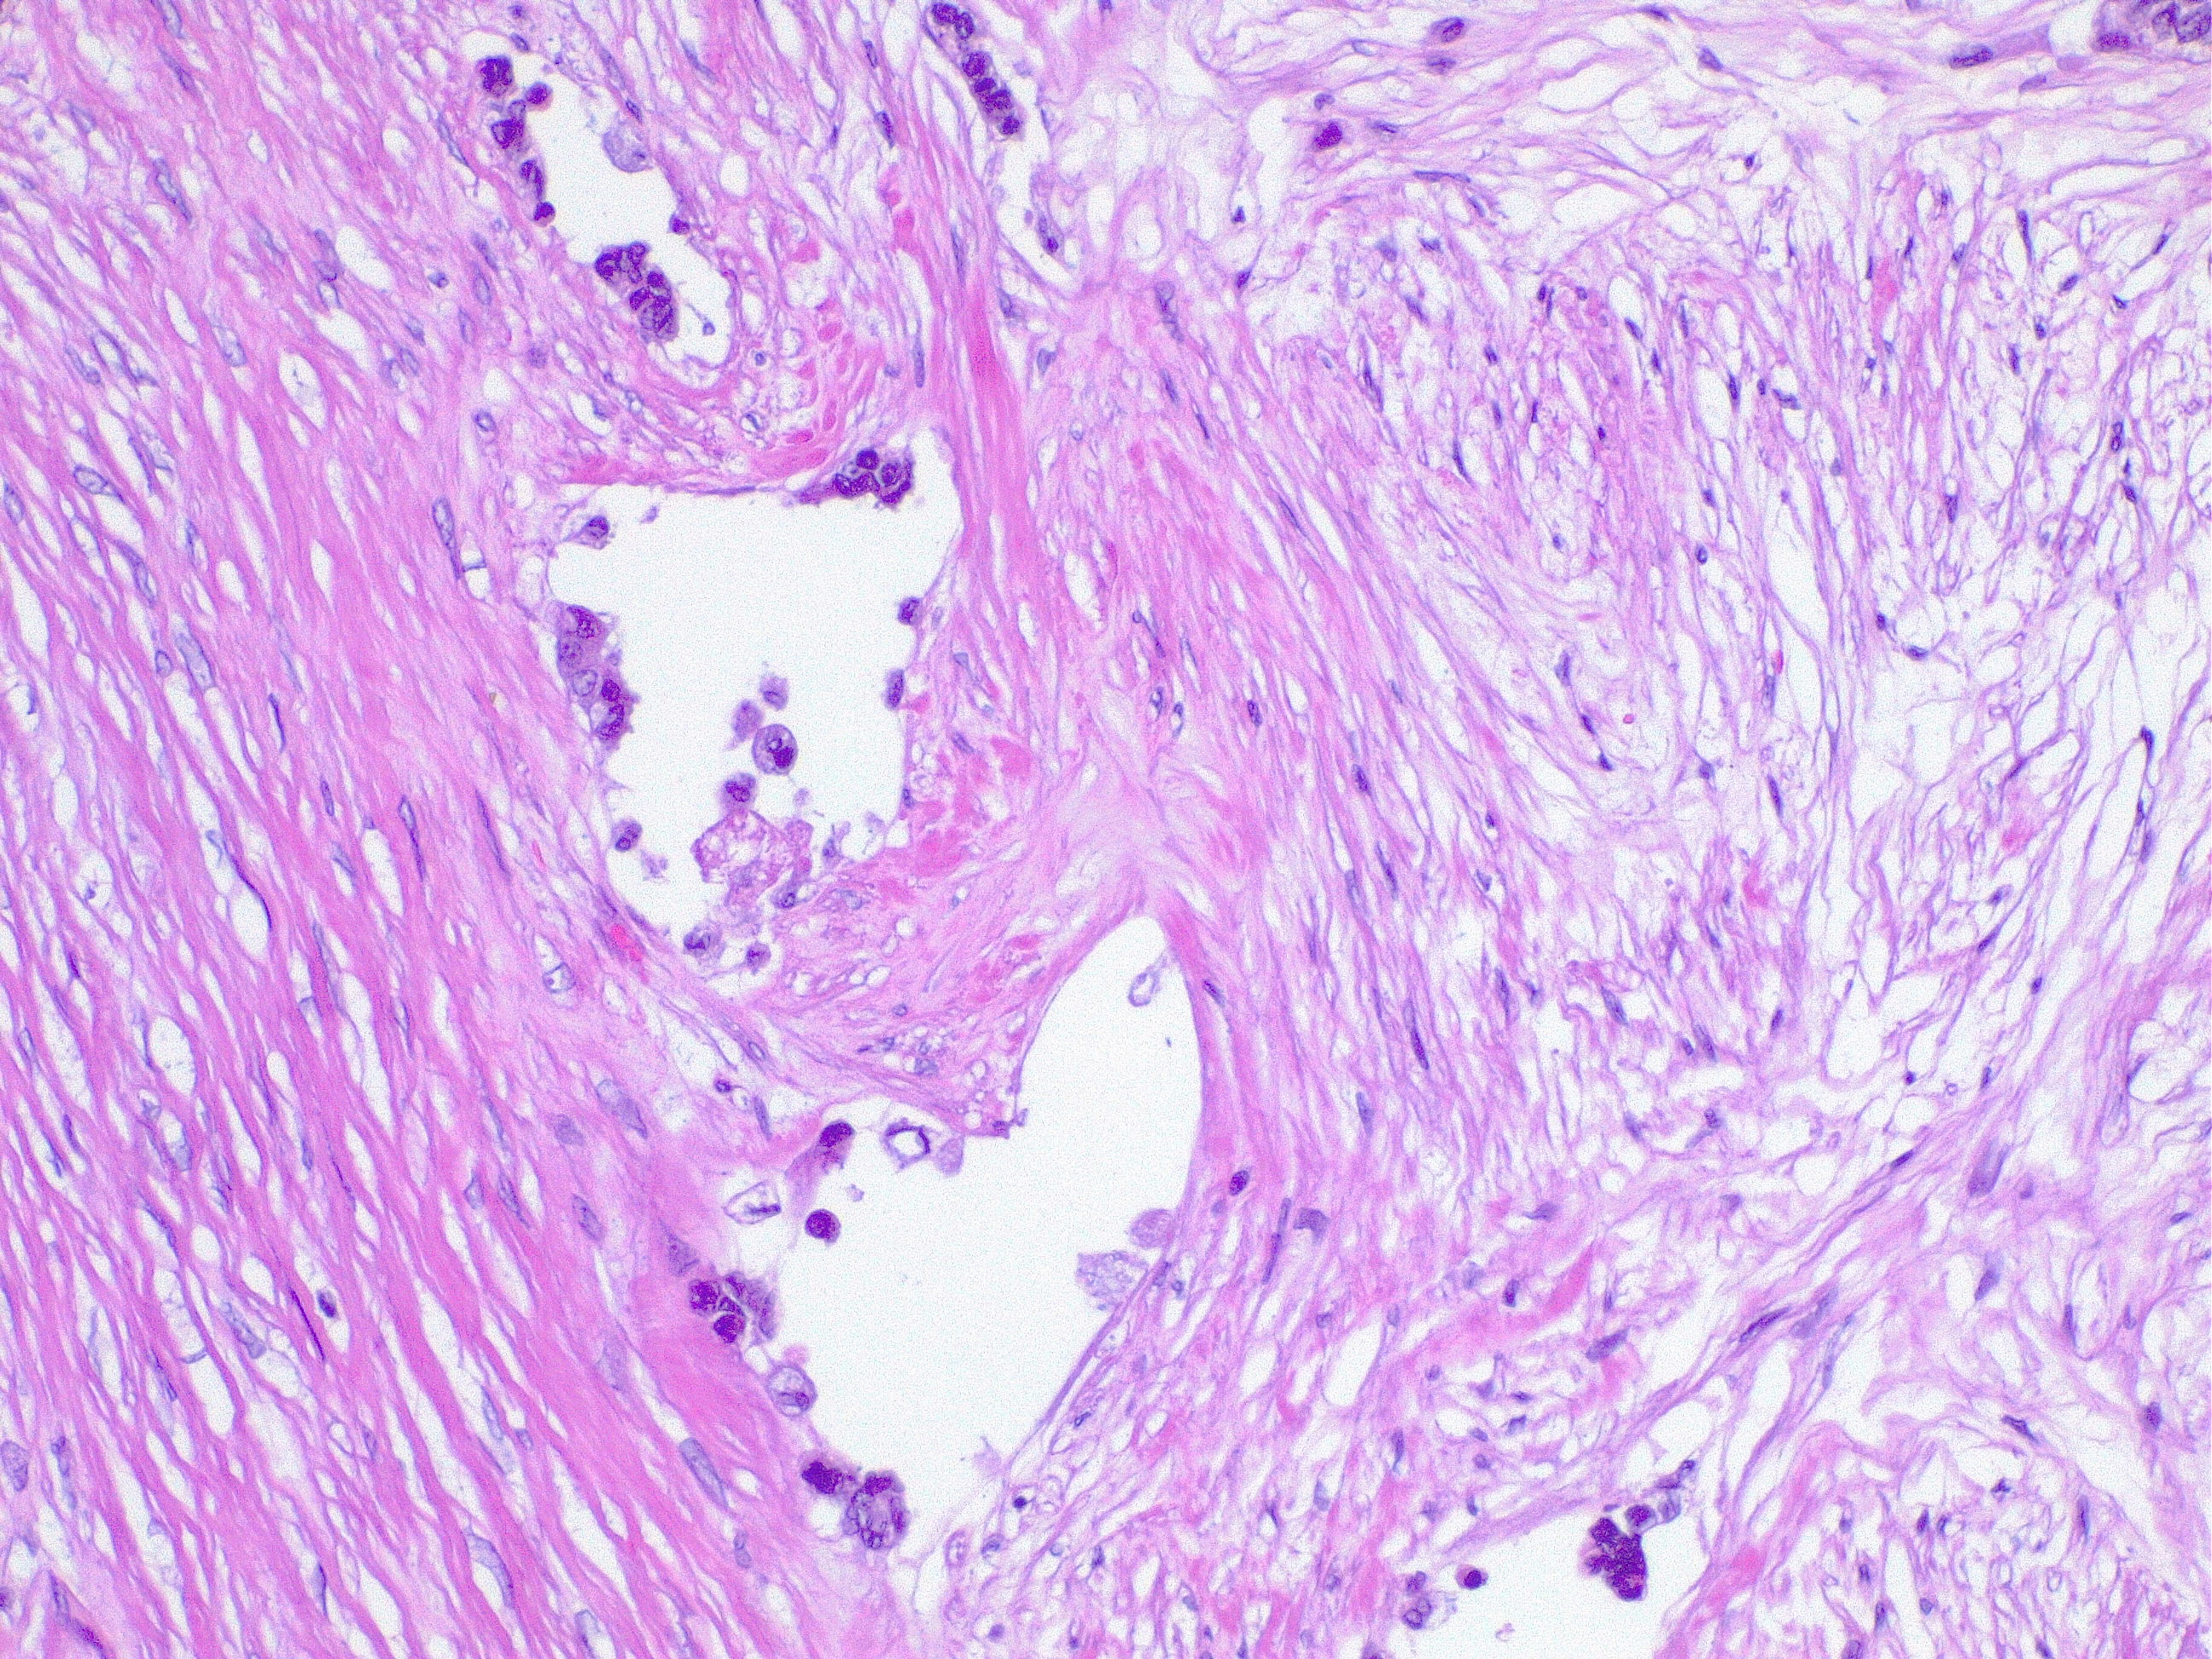 Colorectal cancer (CRC). Lymphatic space invasion by neoplastic cells. This is considered a negative prognostic factor, regardless of tumor grade or stage.